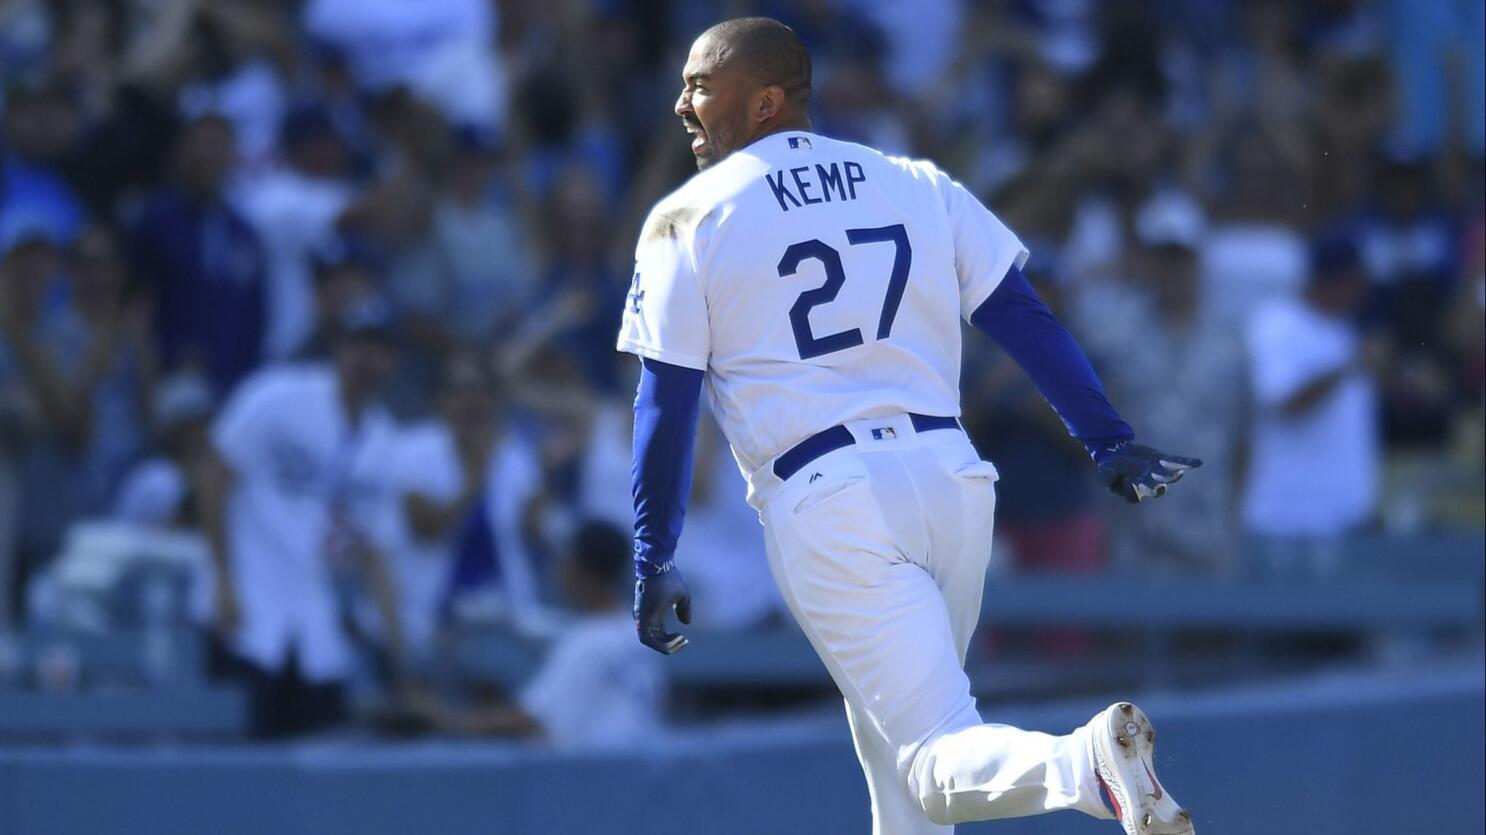 Matt Kemp is still with the Dodgers, 2 weeks before spring